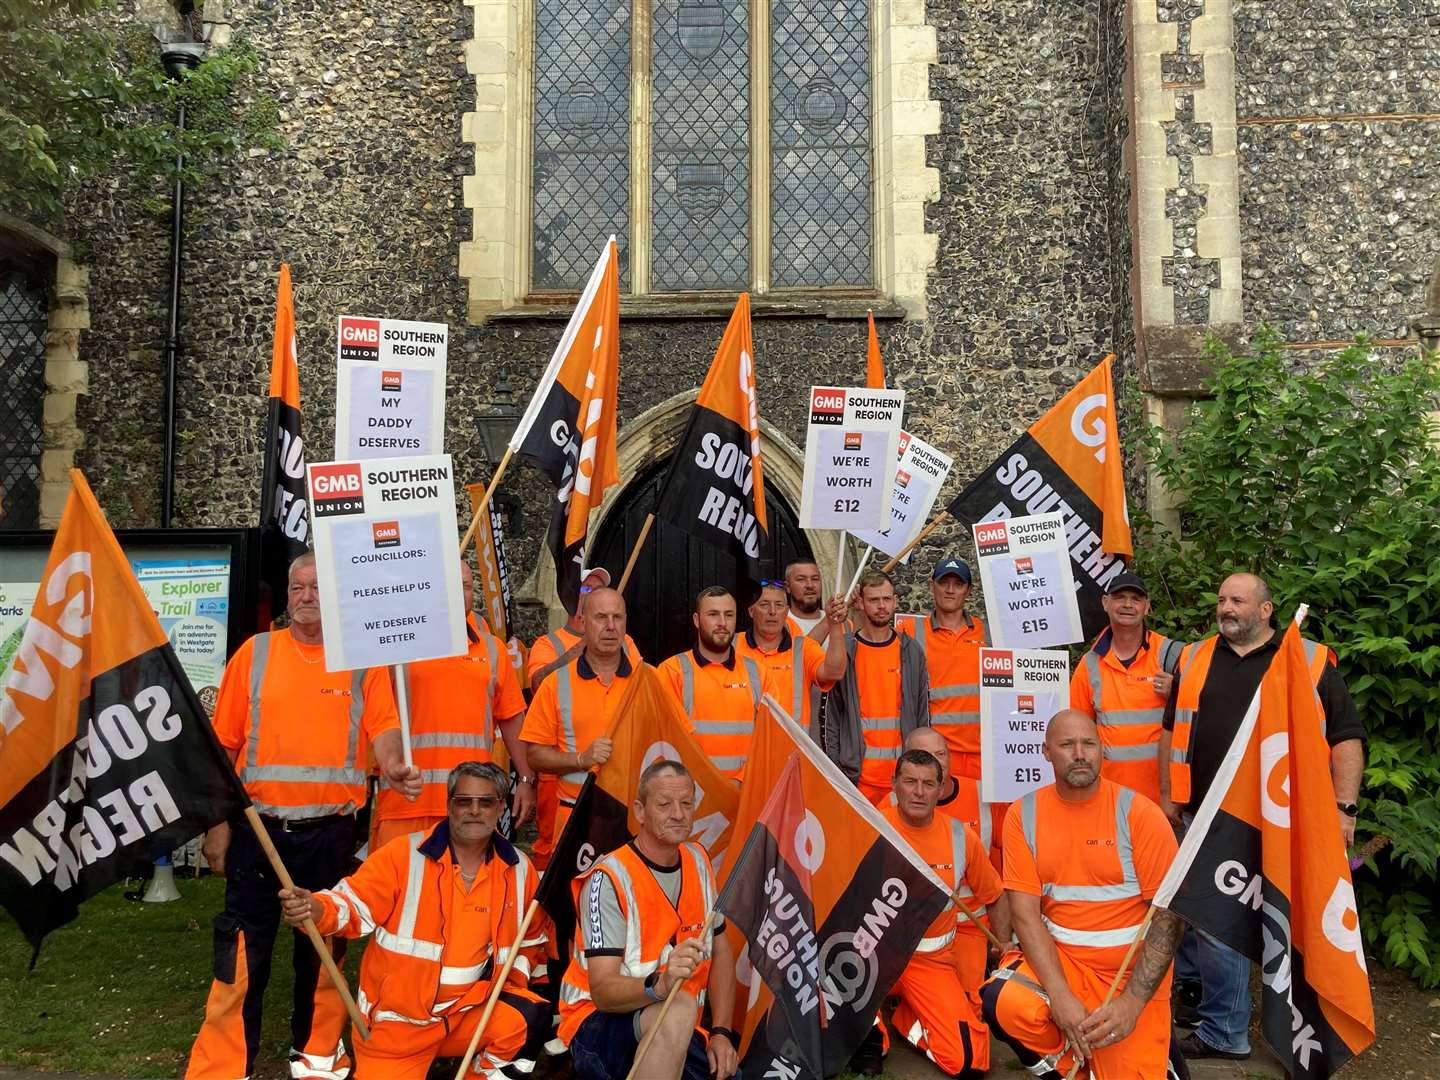 Canterbury bin workers have been on strike for more than a month now